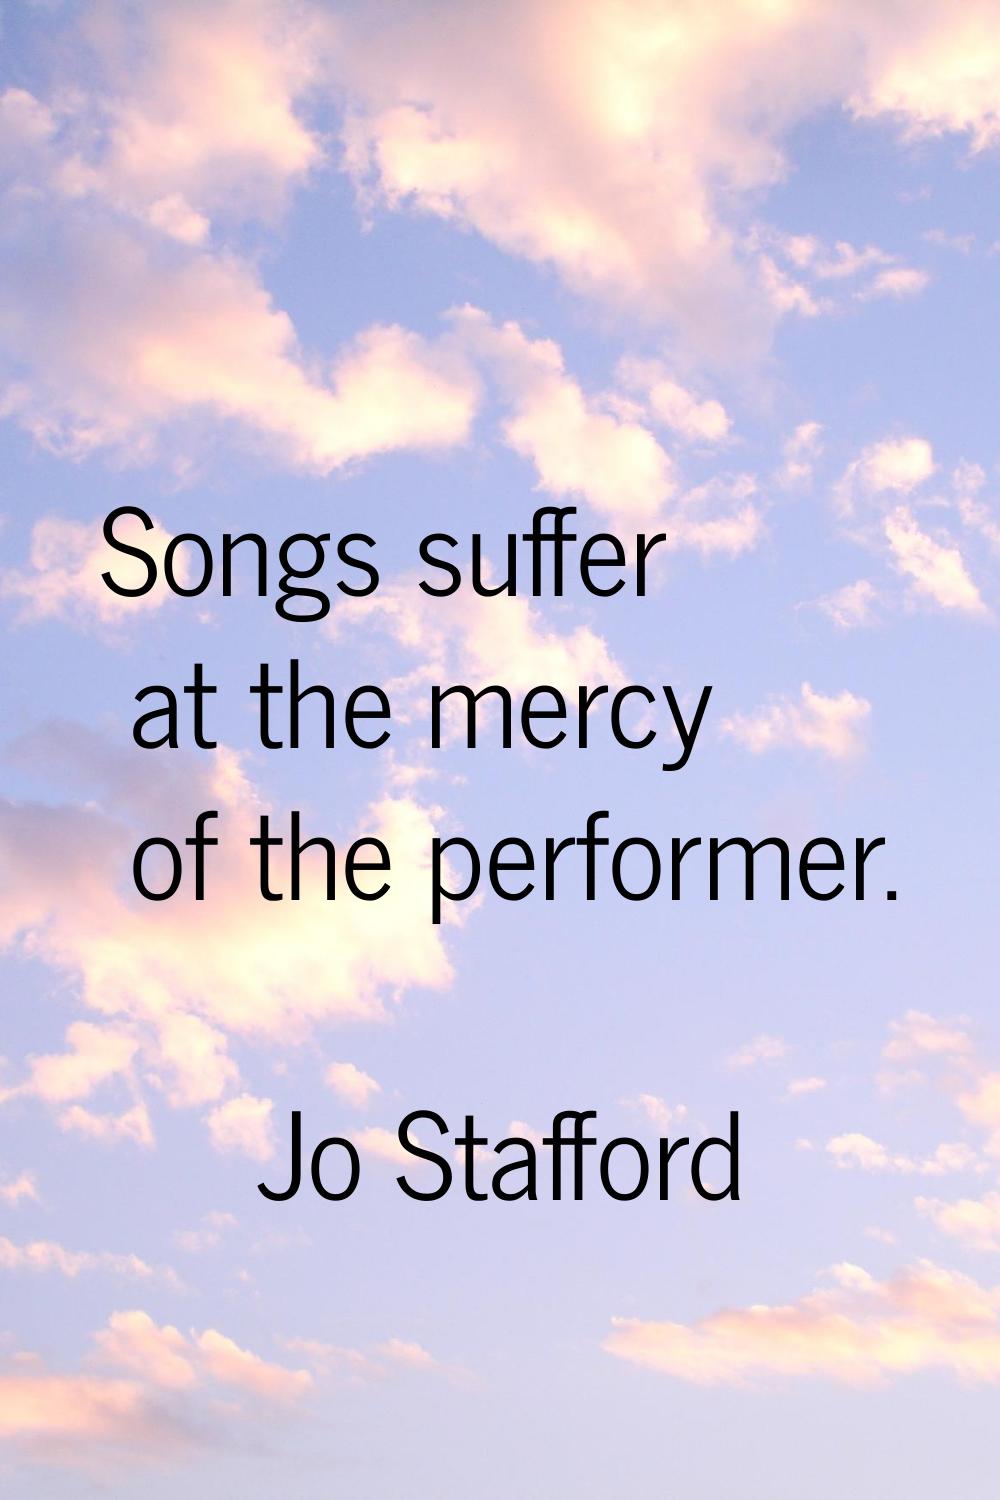 Songs suffer at the mercy of the performer.